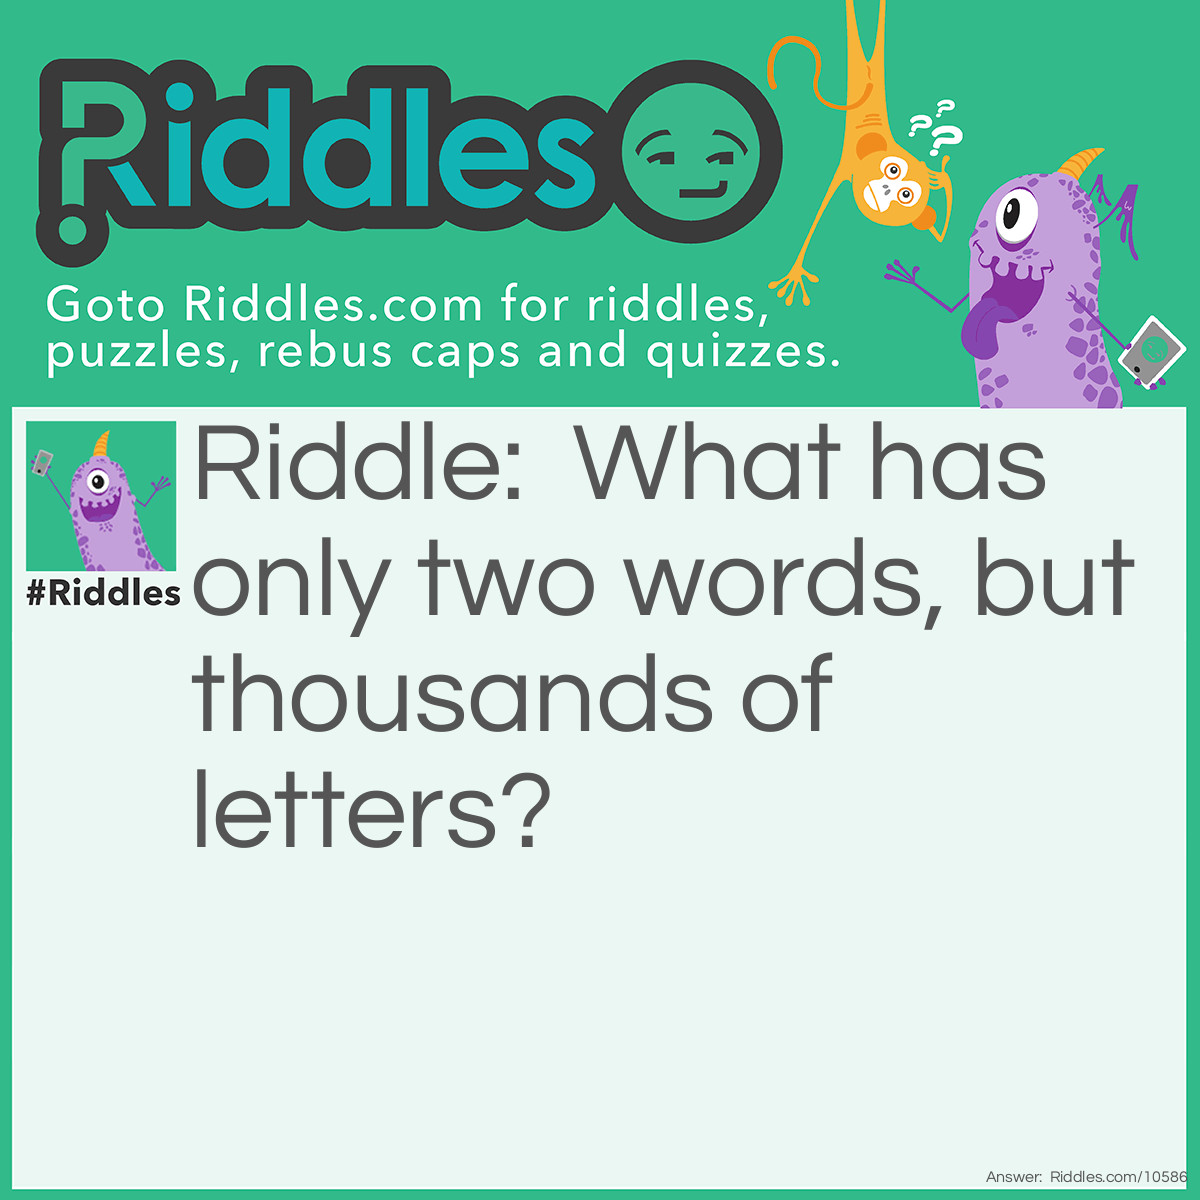 Riddle: What has only two words, but thousands of letters? Answer: A Post Office.